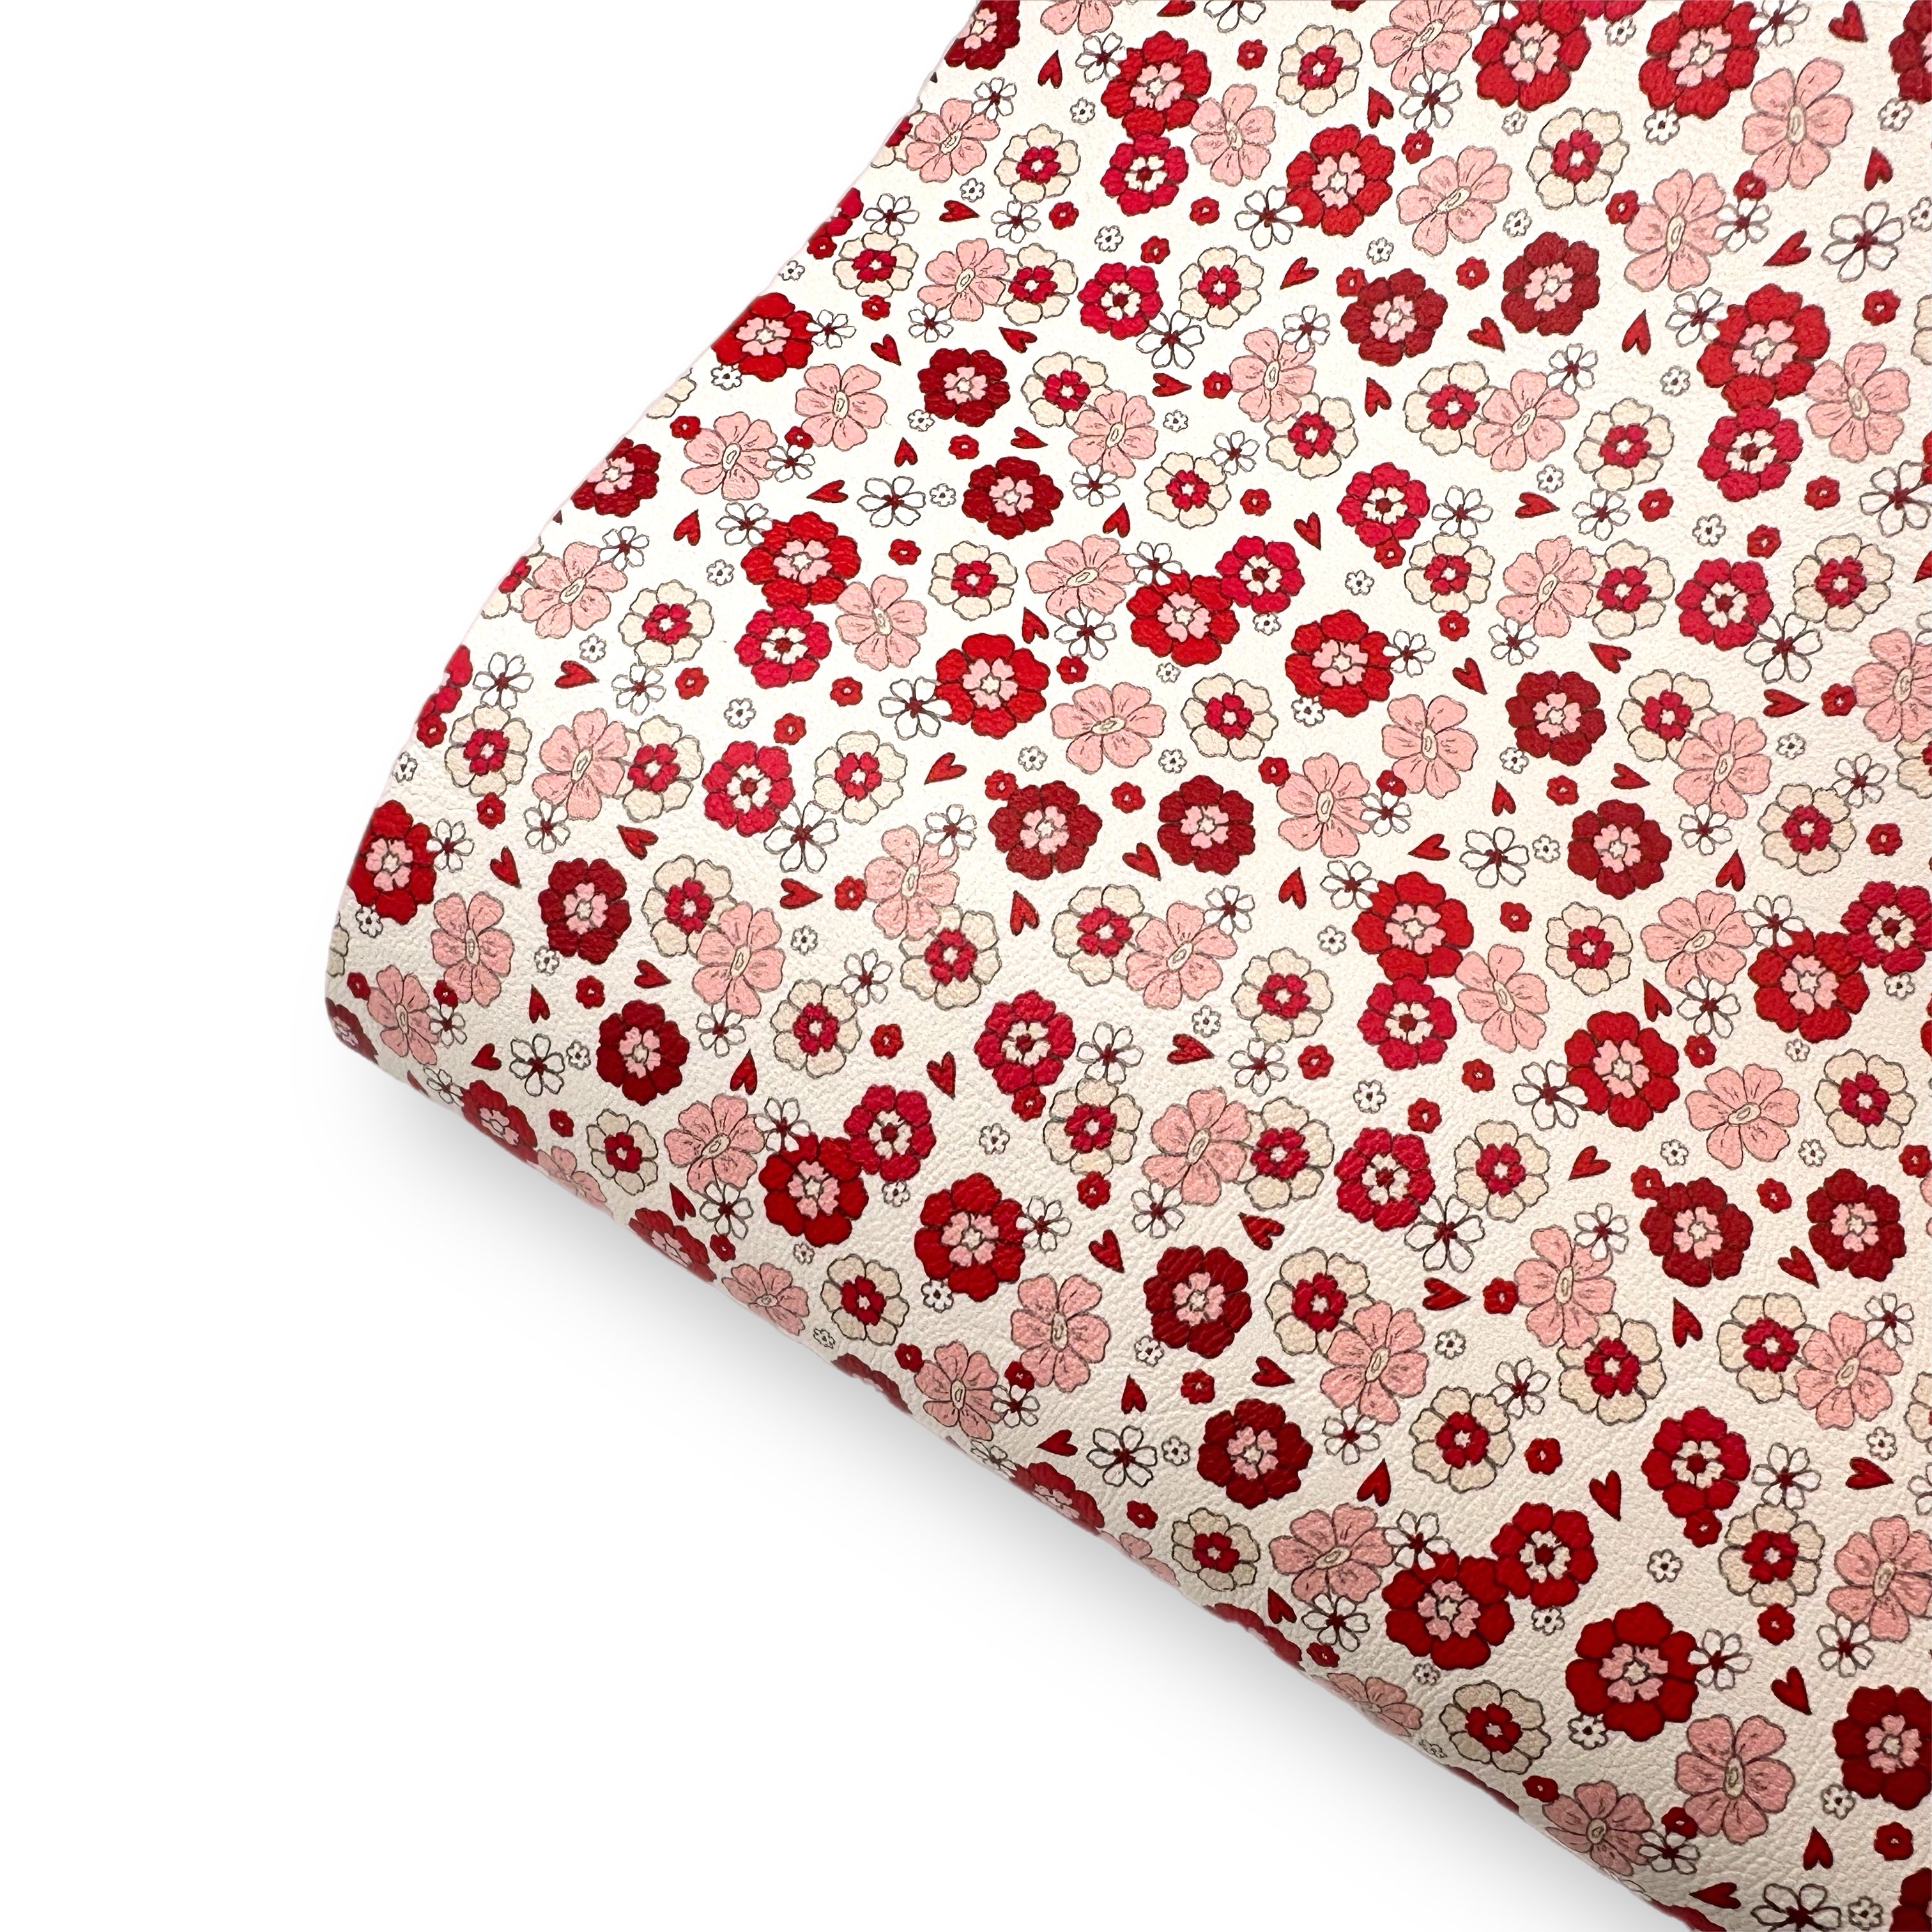 Retro Loved Up Blooms Premium Faux Leather Fabric Sheets